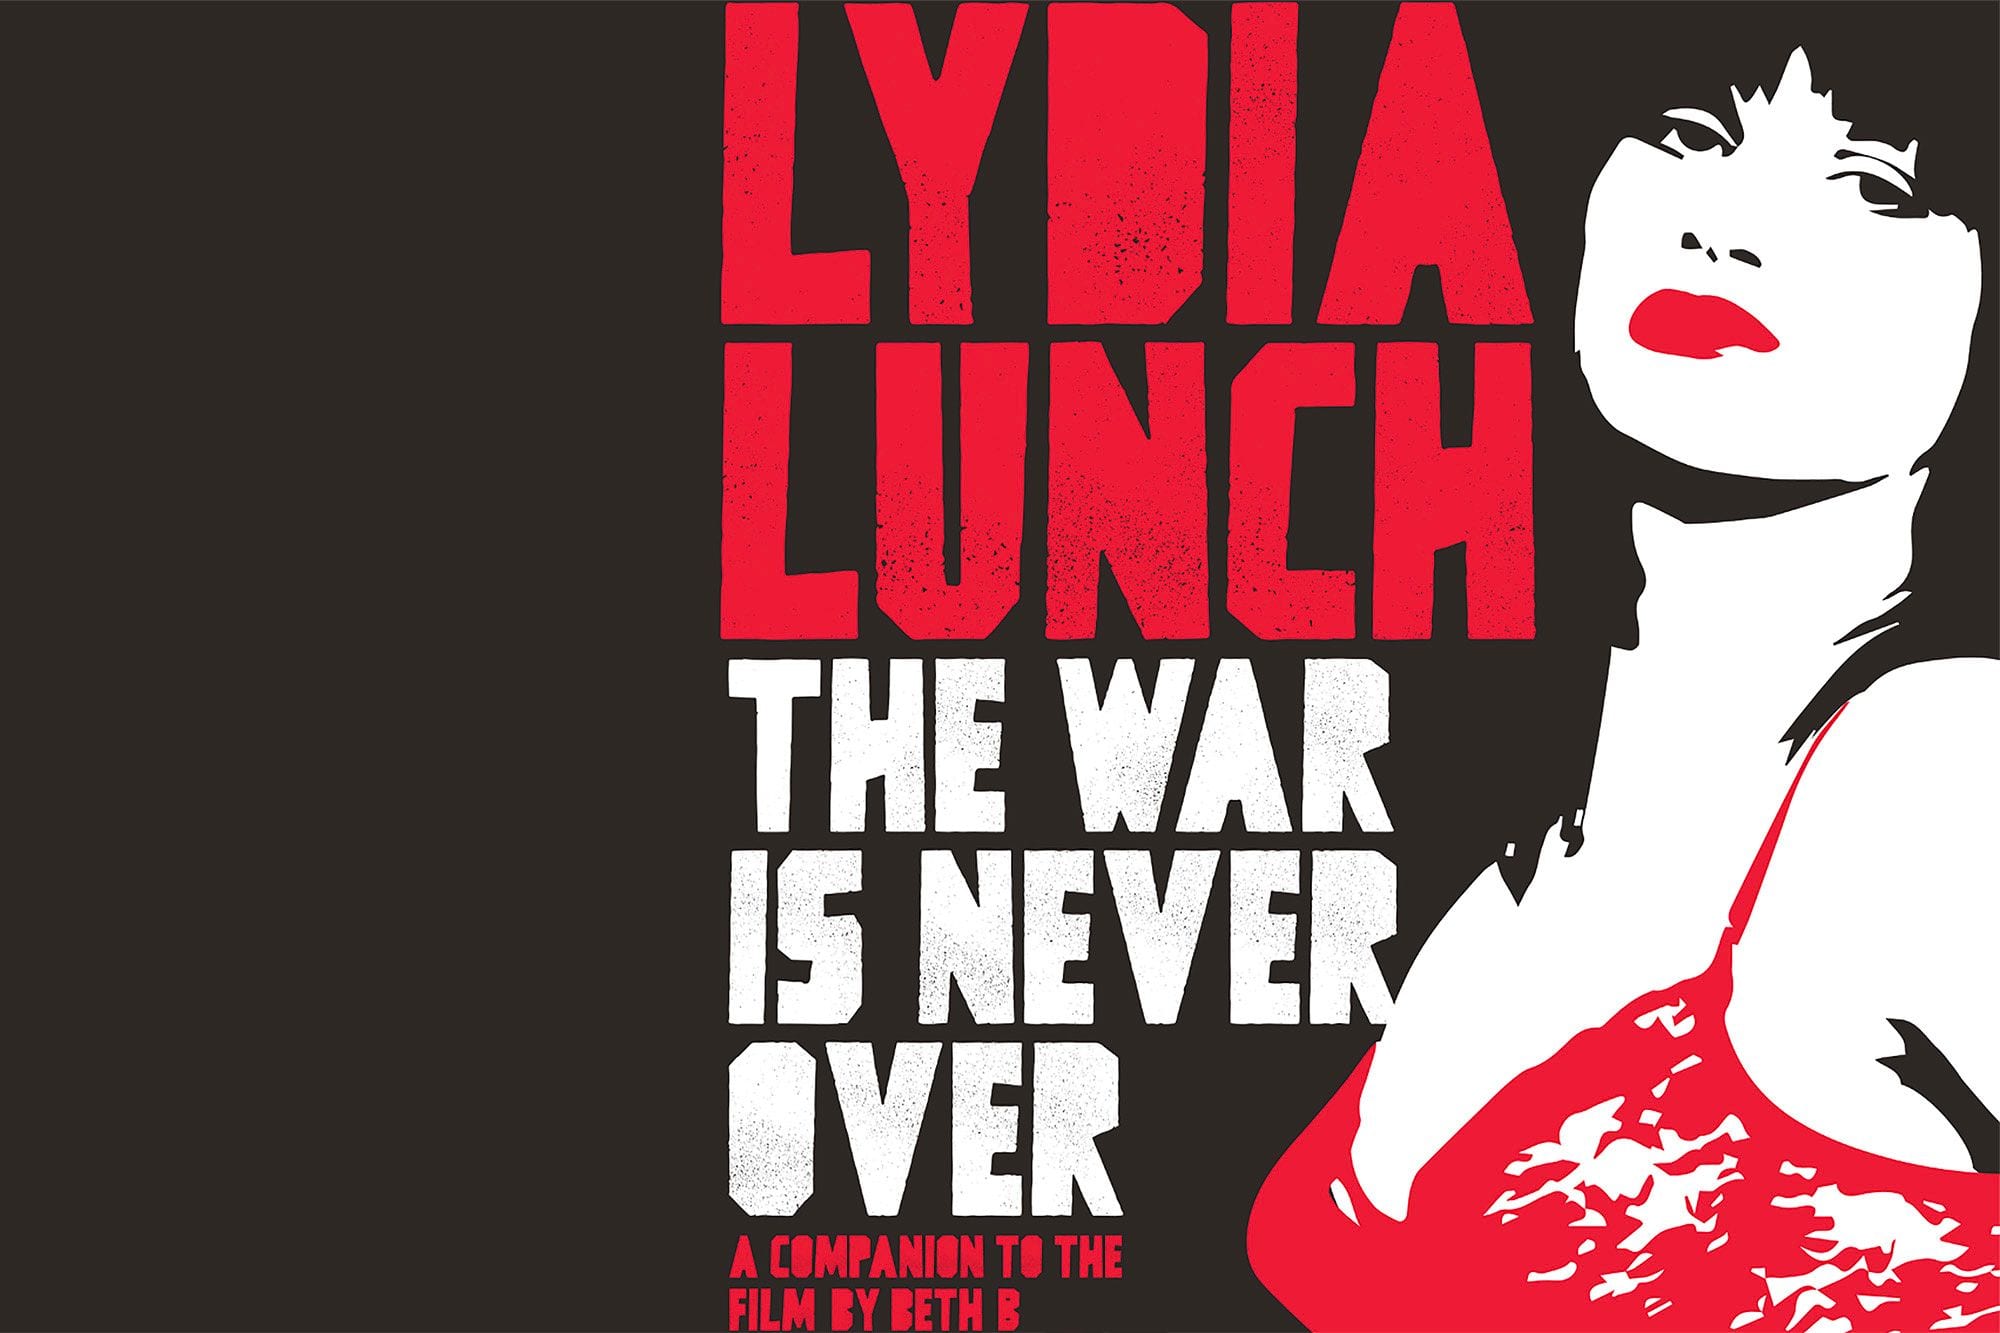 ‘Lydia Lunch: The War Is Never Over (A Companion to the Film by Beth B)’ (excerpt)